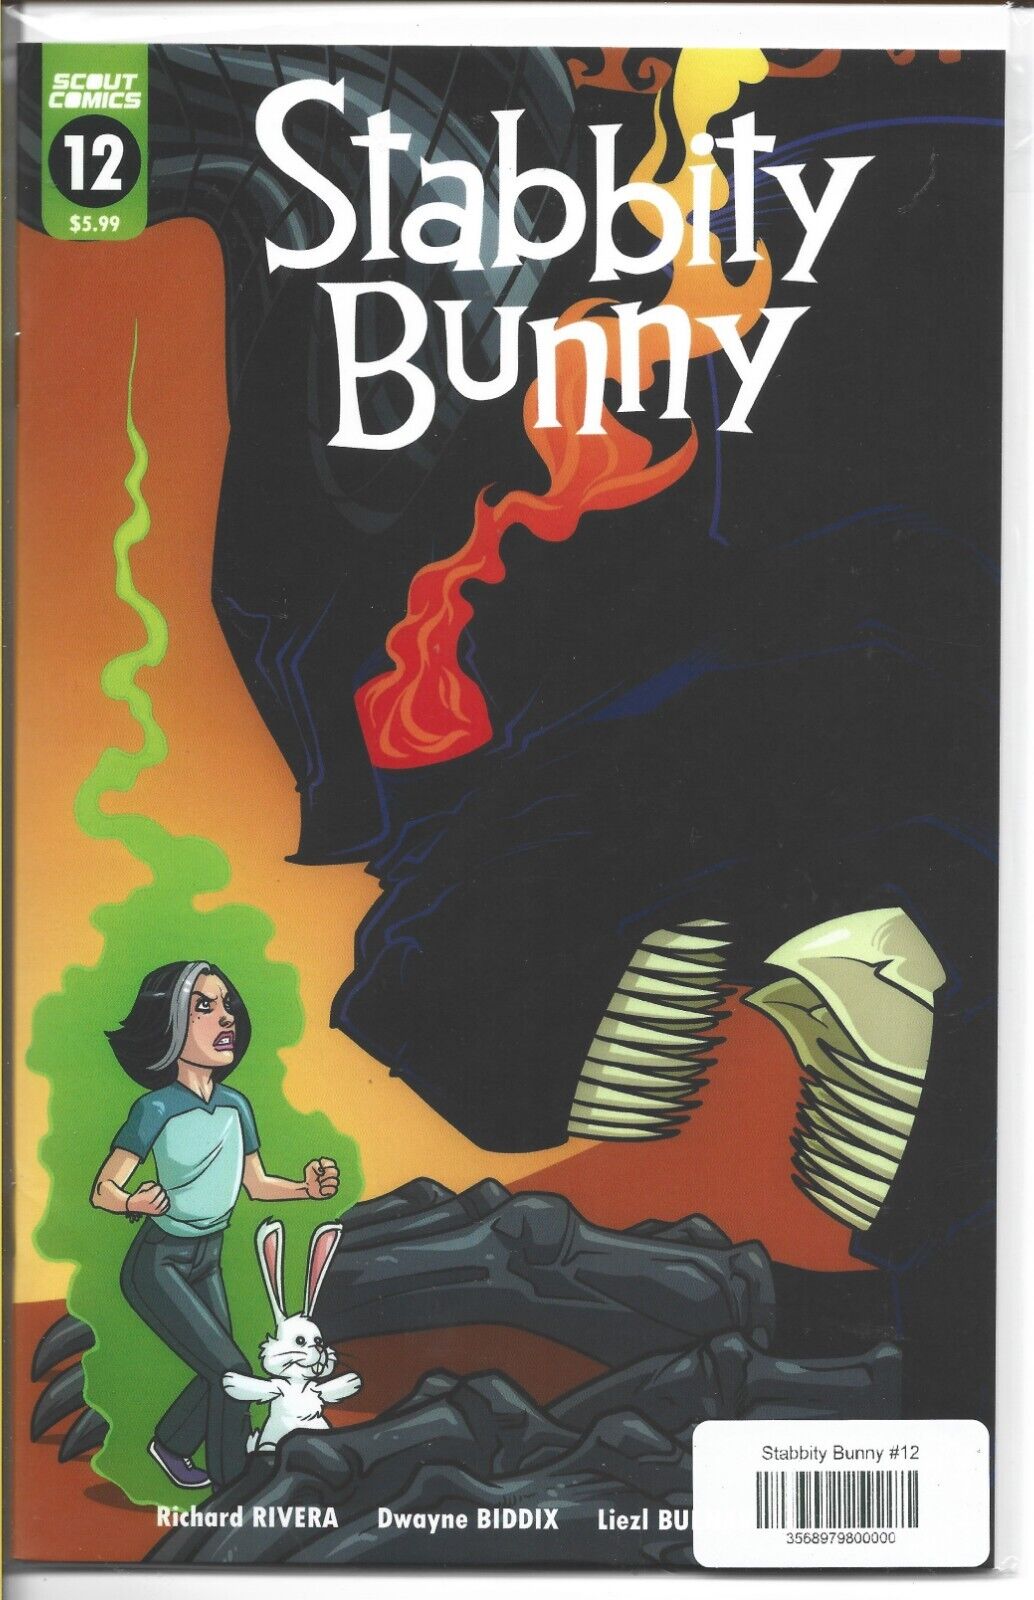 STABBITY BUNNY #12 SCOUT COMICS 2022 NEW/UNREAD/BAGGED/BOARDED